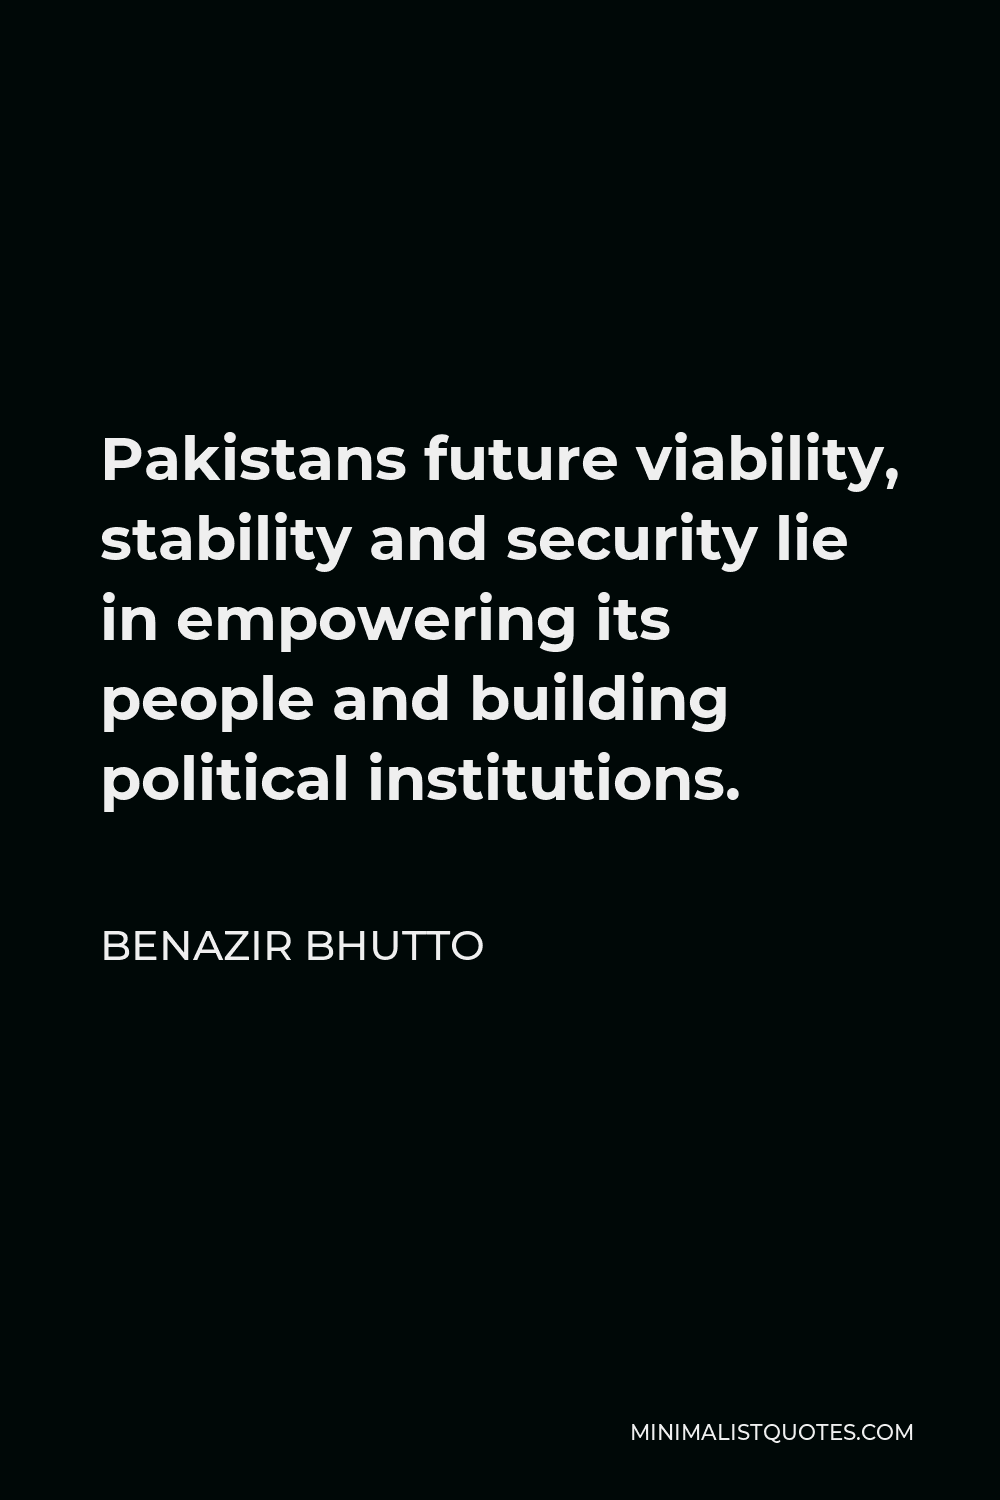 Benazir Bhutto Quote - Pakistans future viability, stability and security lie in empowering its people and building political institutions.